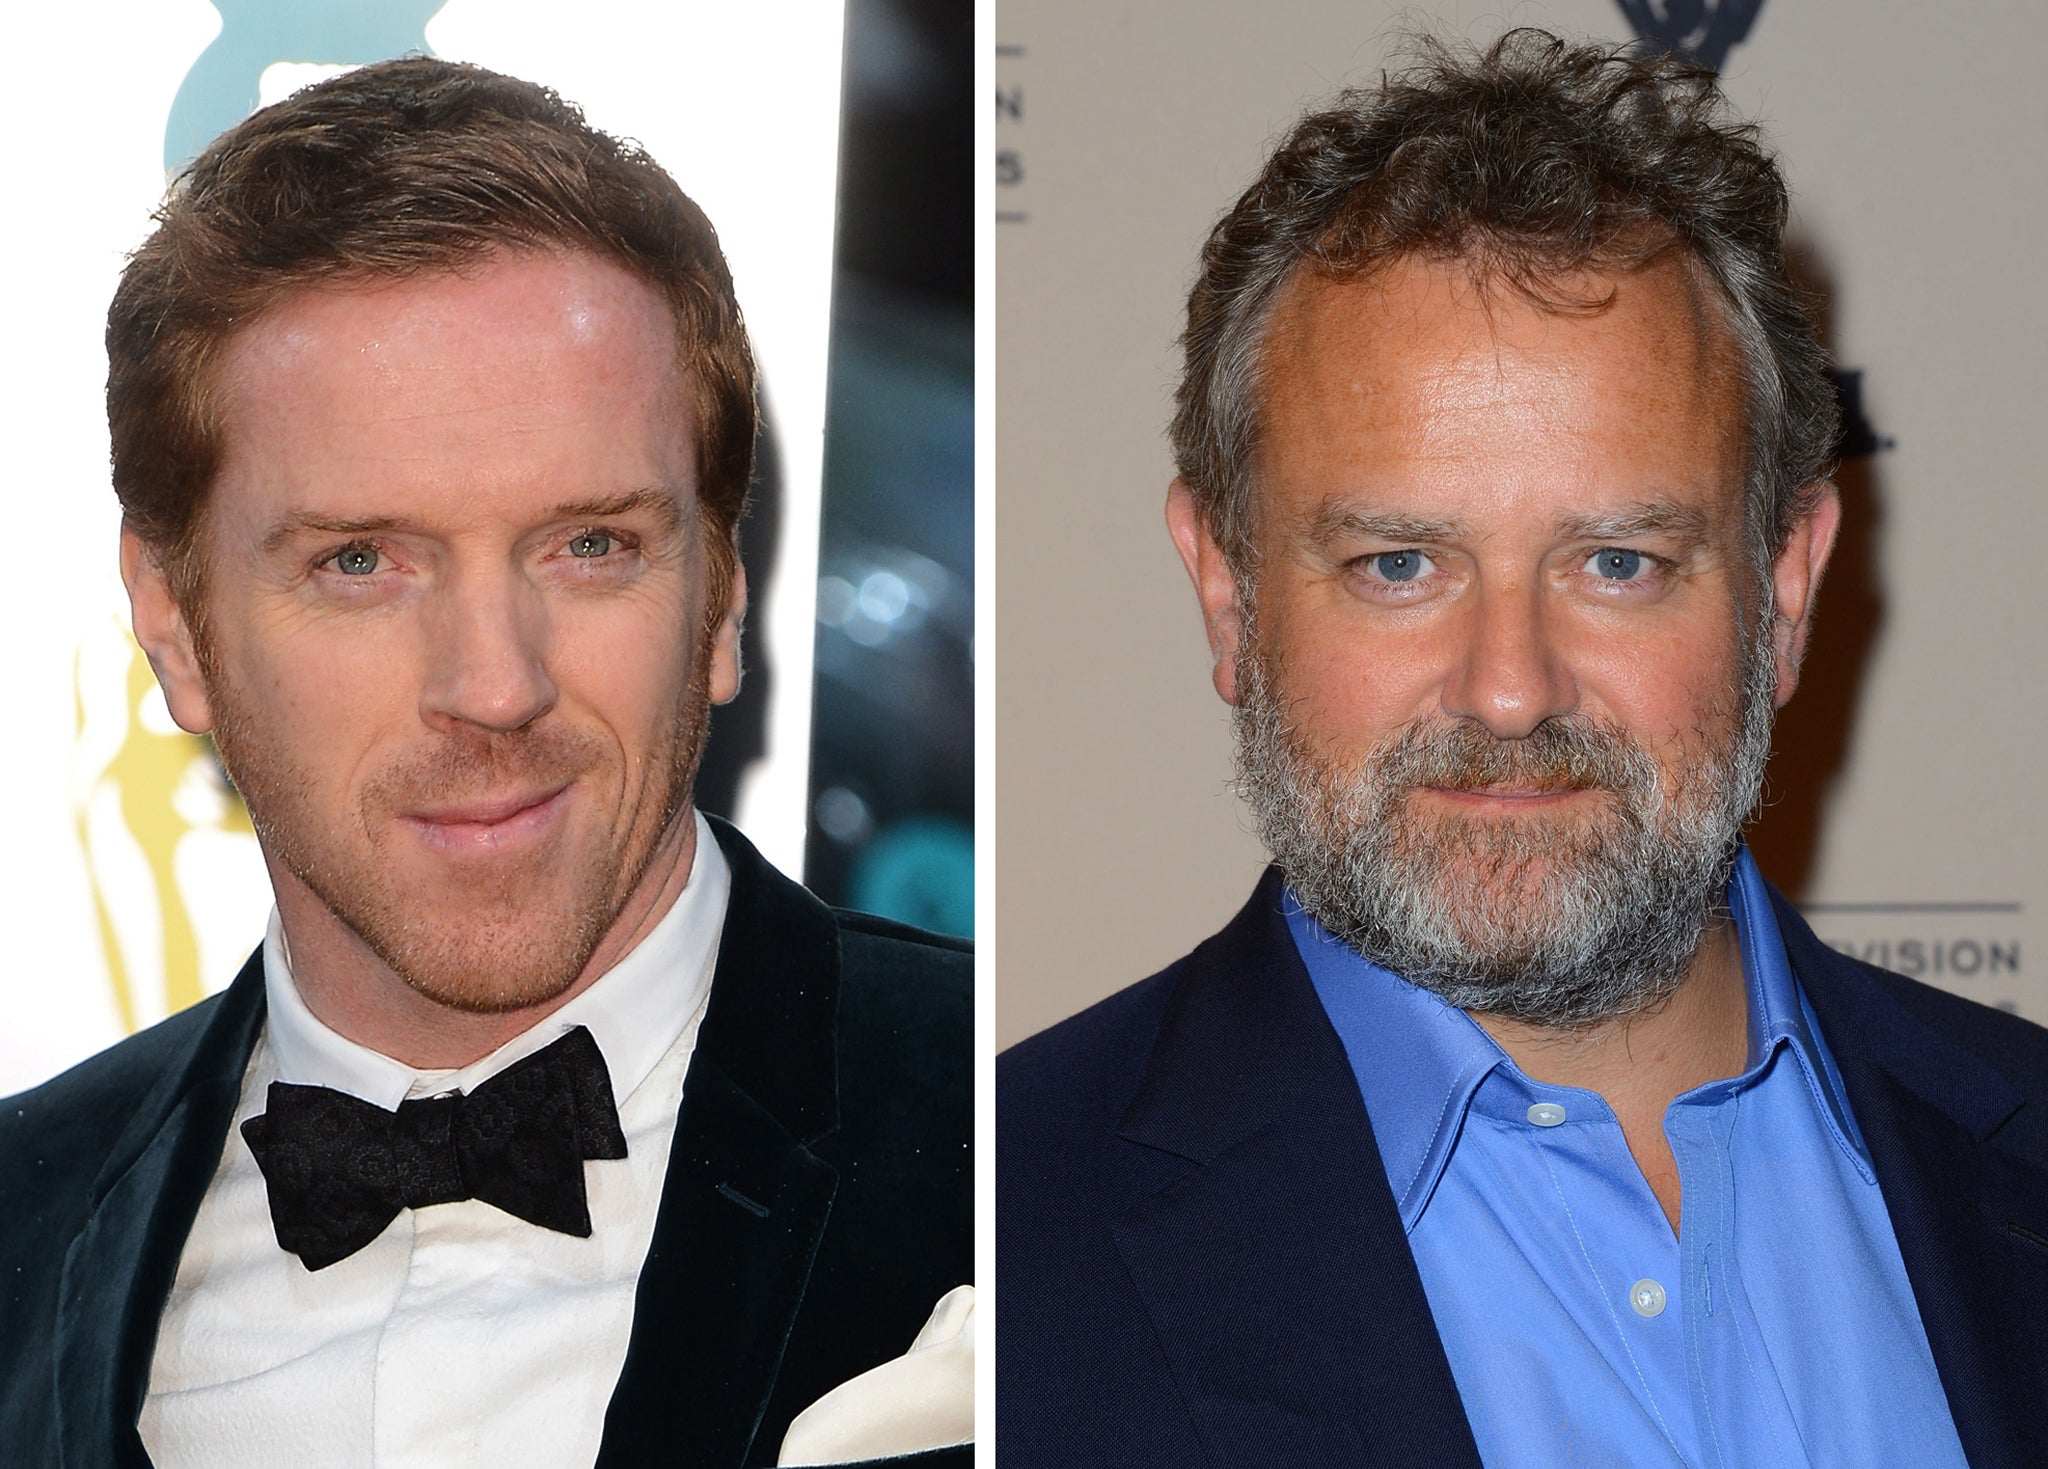 Emmy Awards 2013: Damian Lewis and Hugh Boneville are both nominated for best actor in a drama 